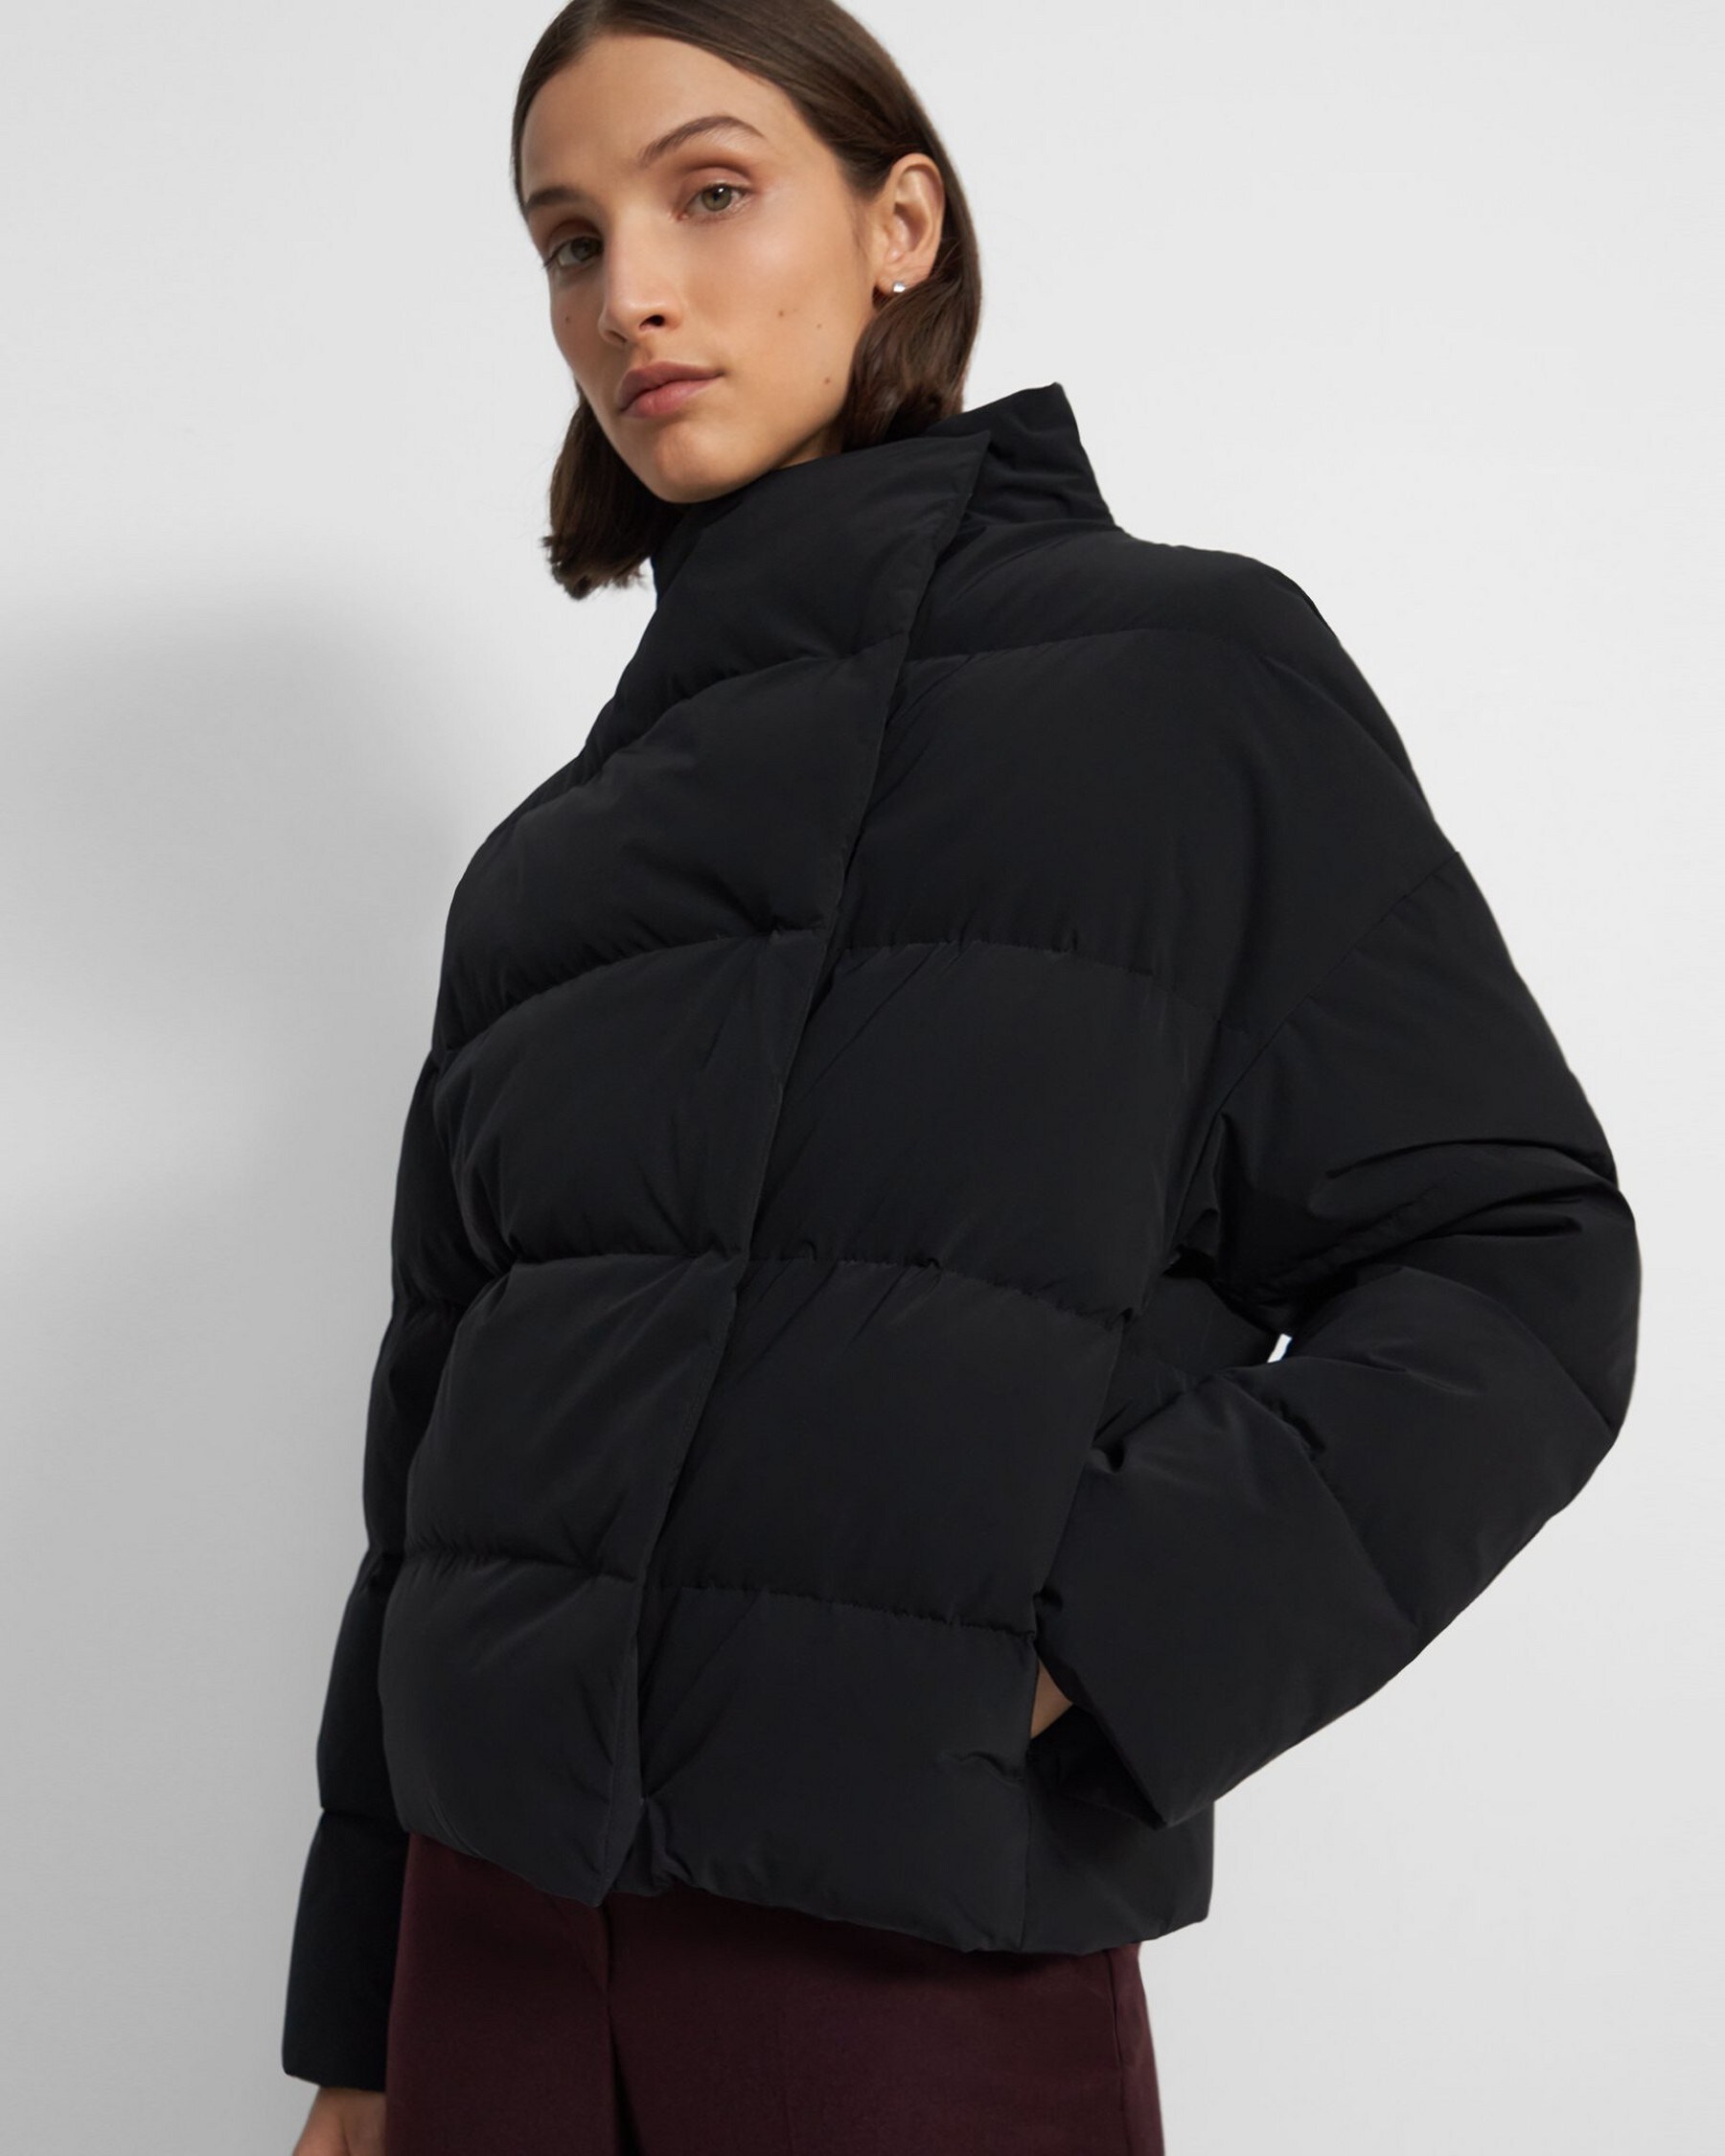 Offset Puffer Jacket in Paper Nylon